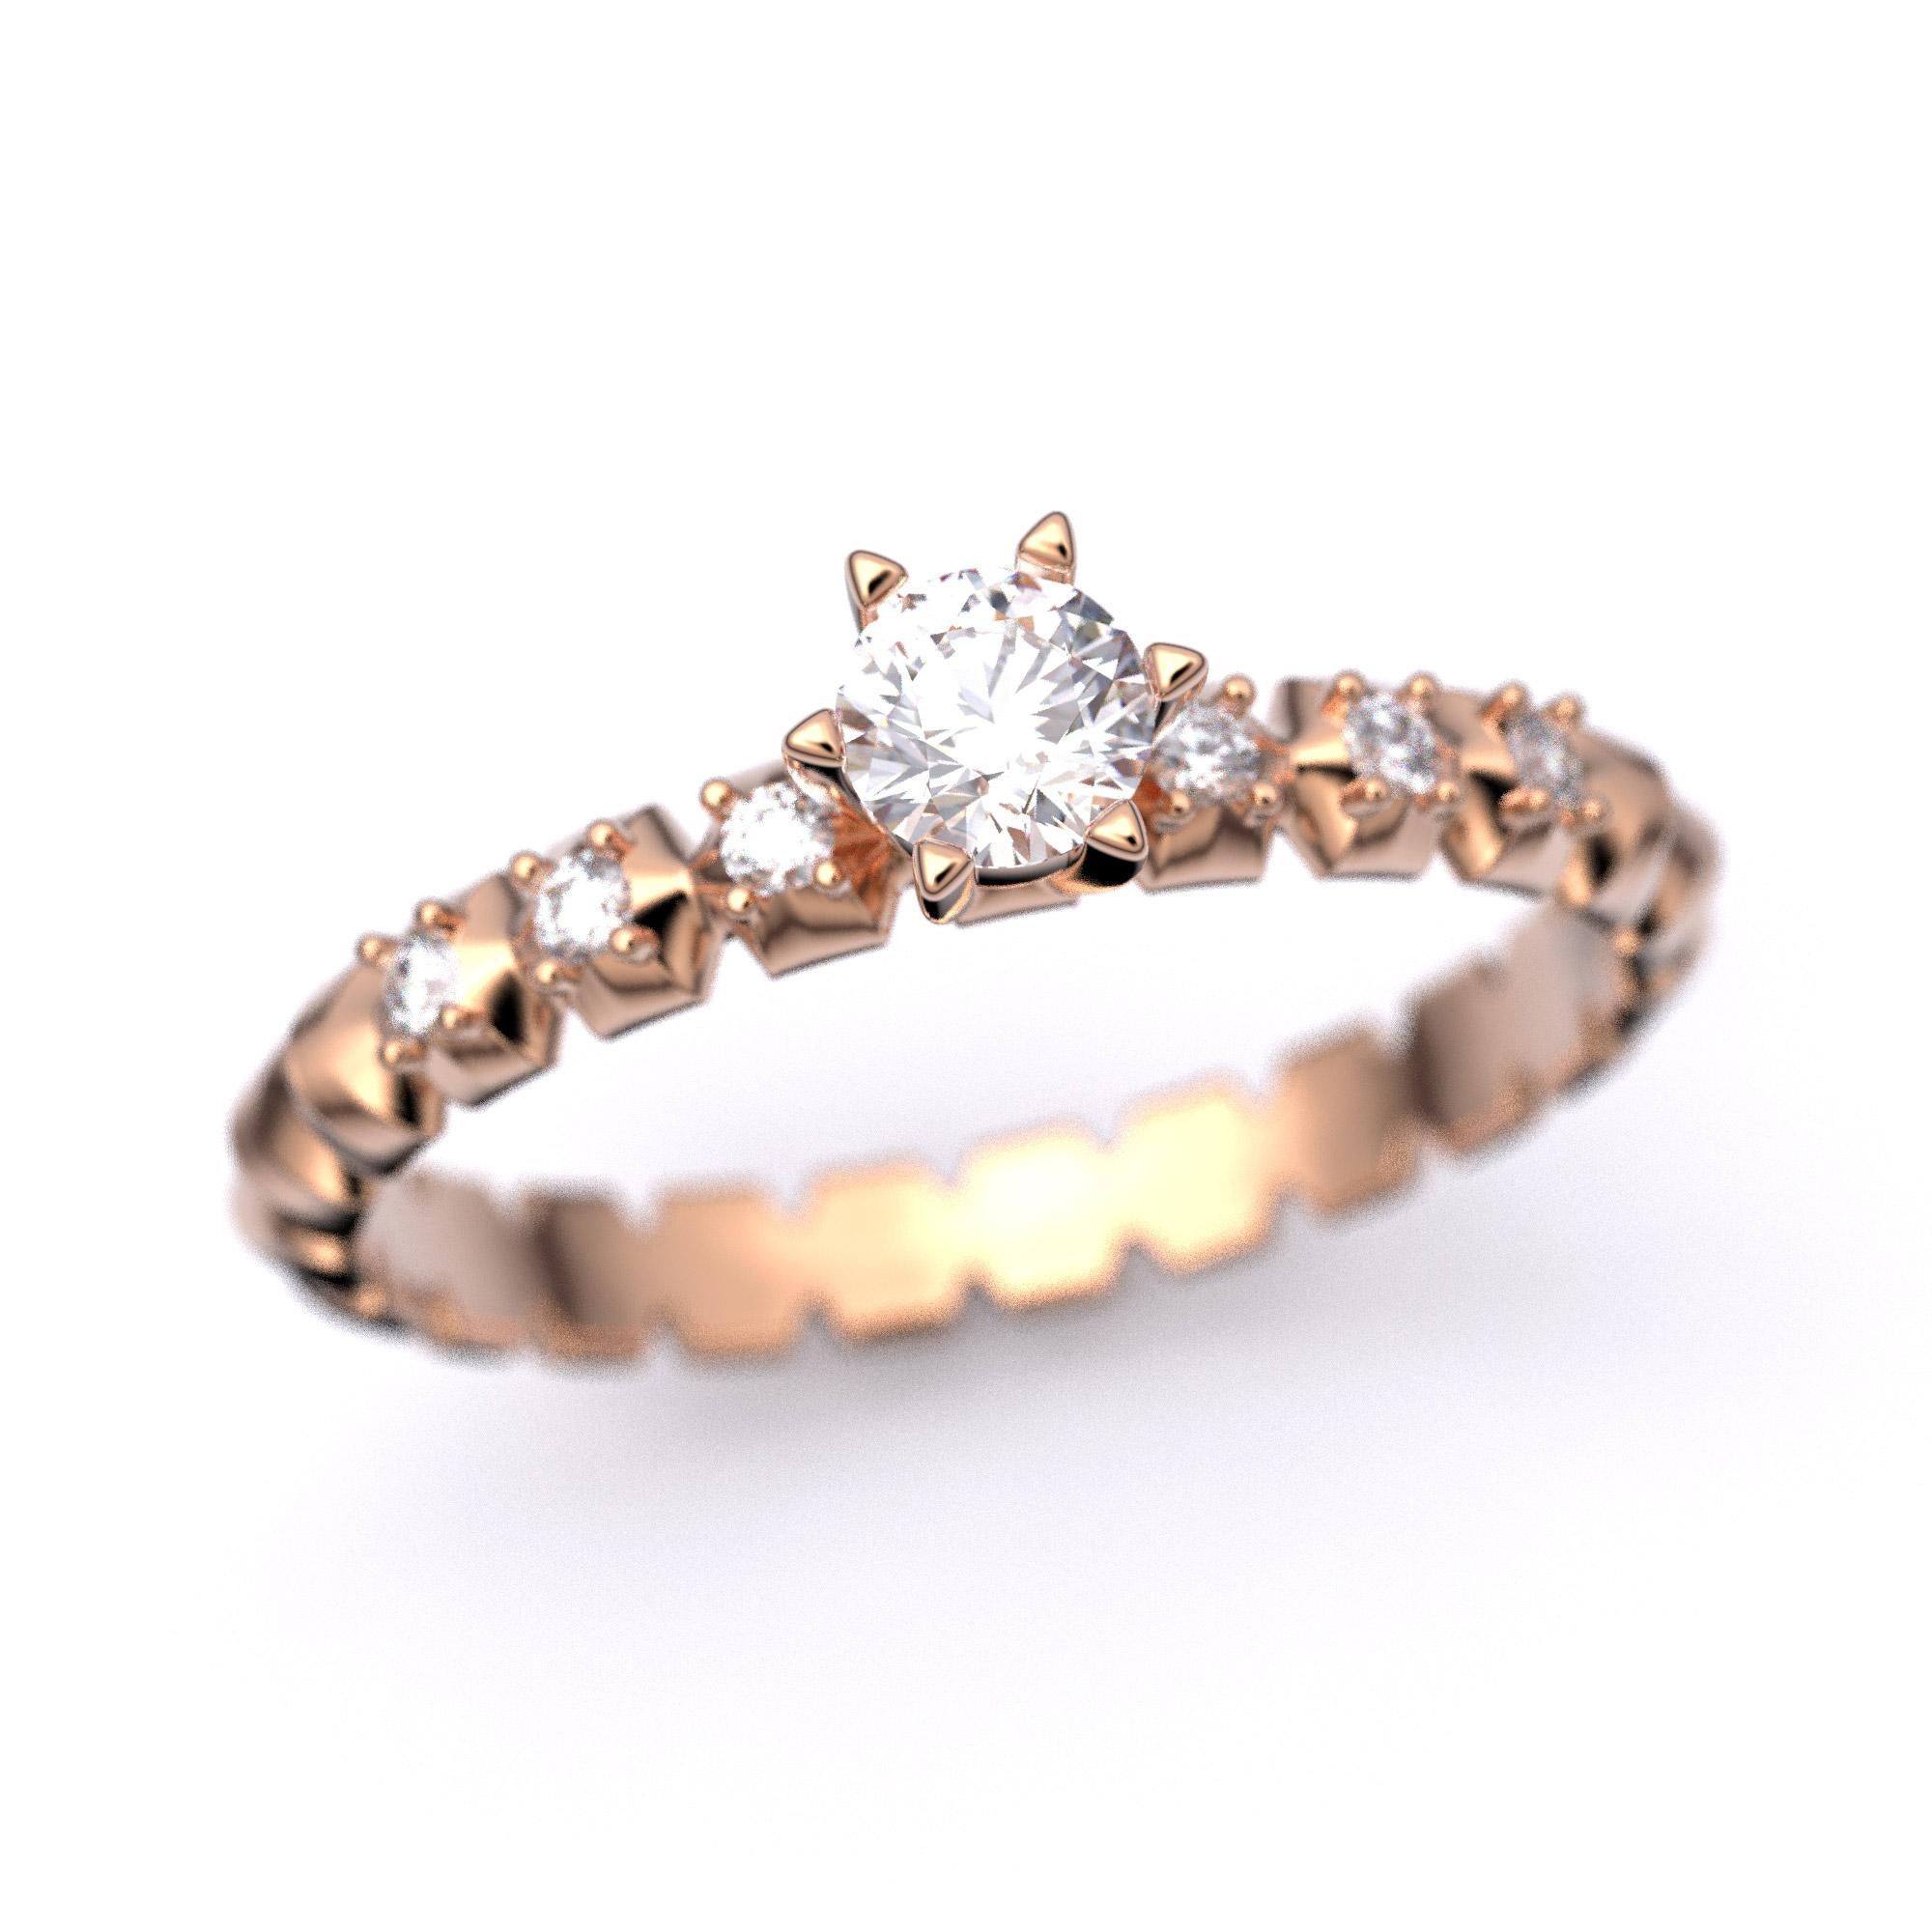 For Sale:  Italian-Made 0.32 Carat Diamond Engagement Ring in 14k Solid Gold 14